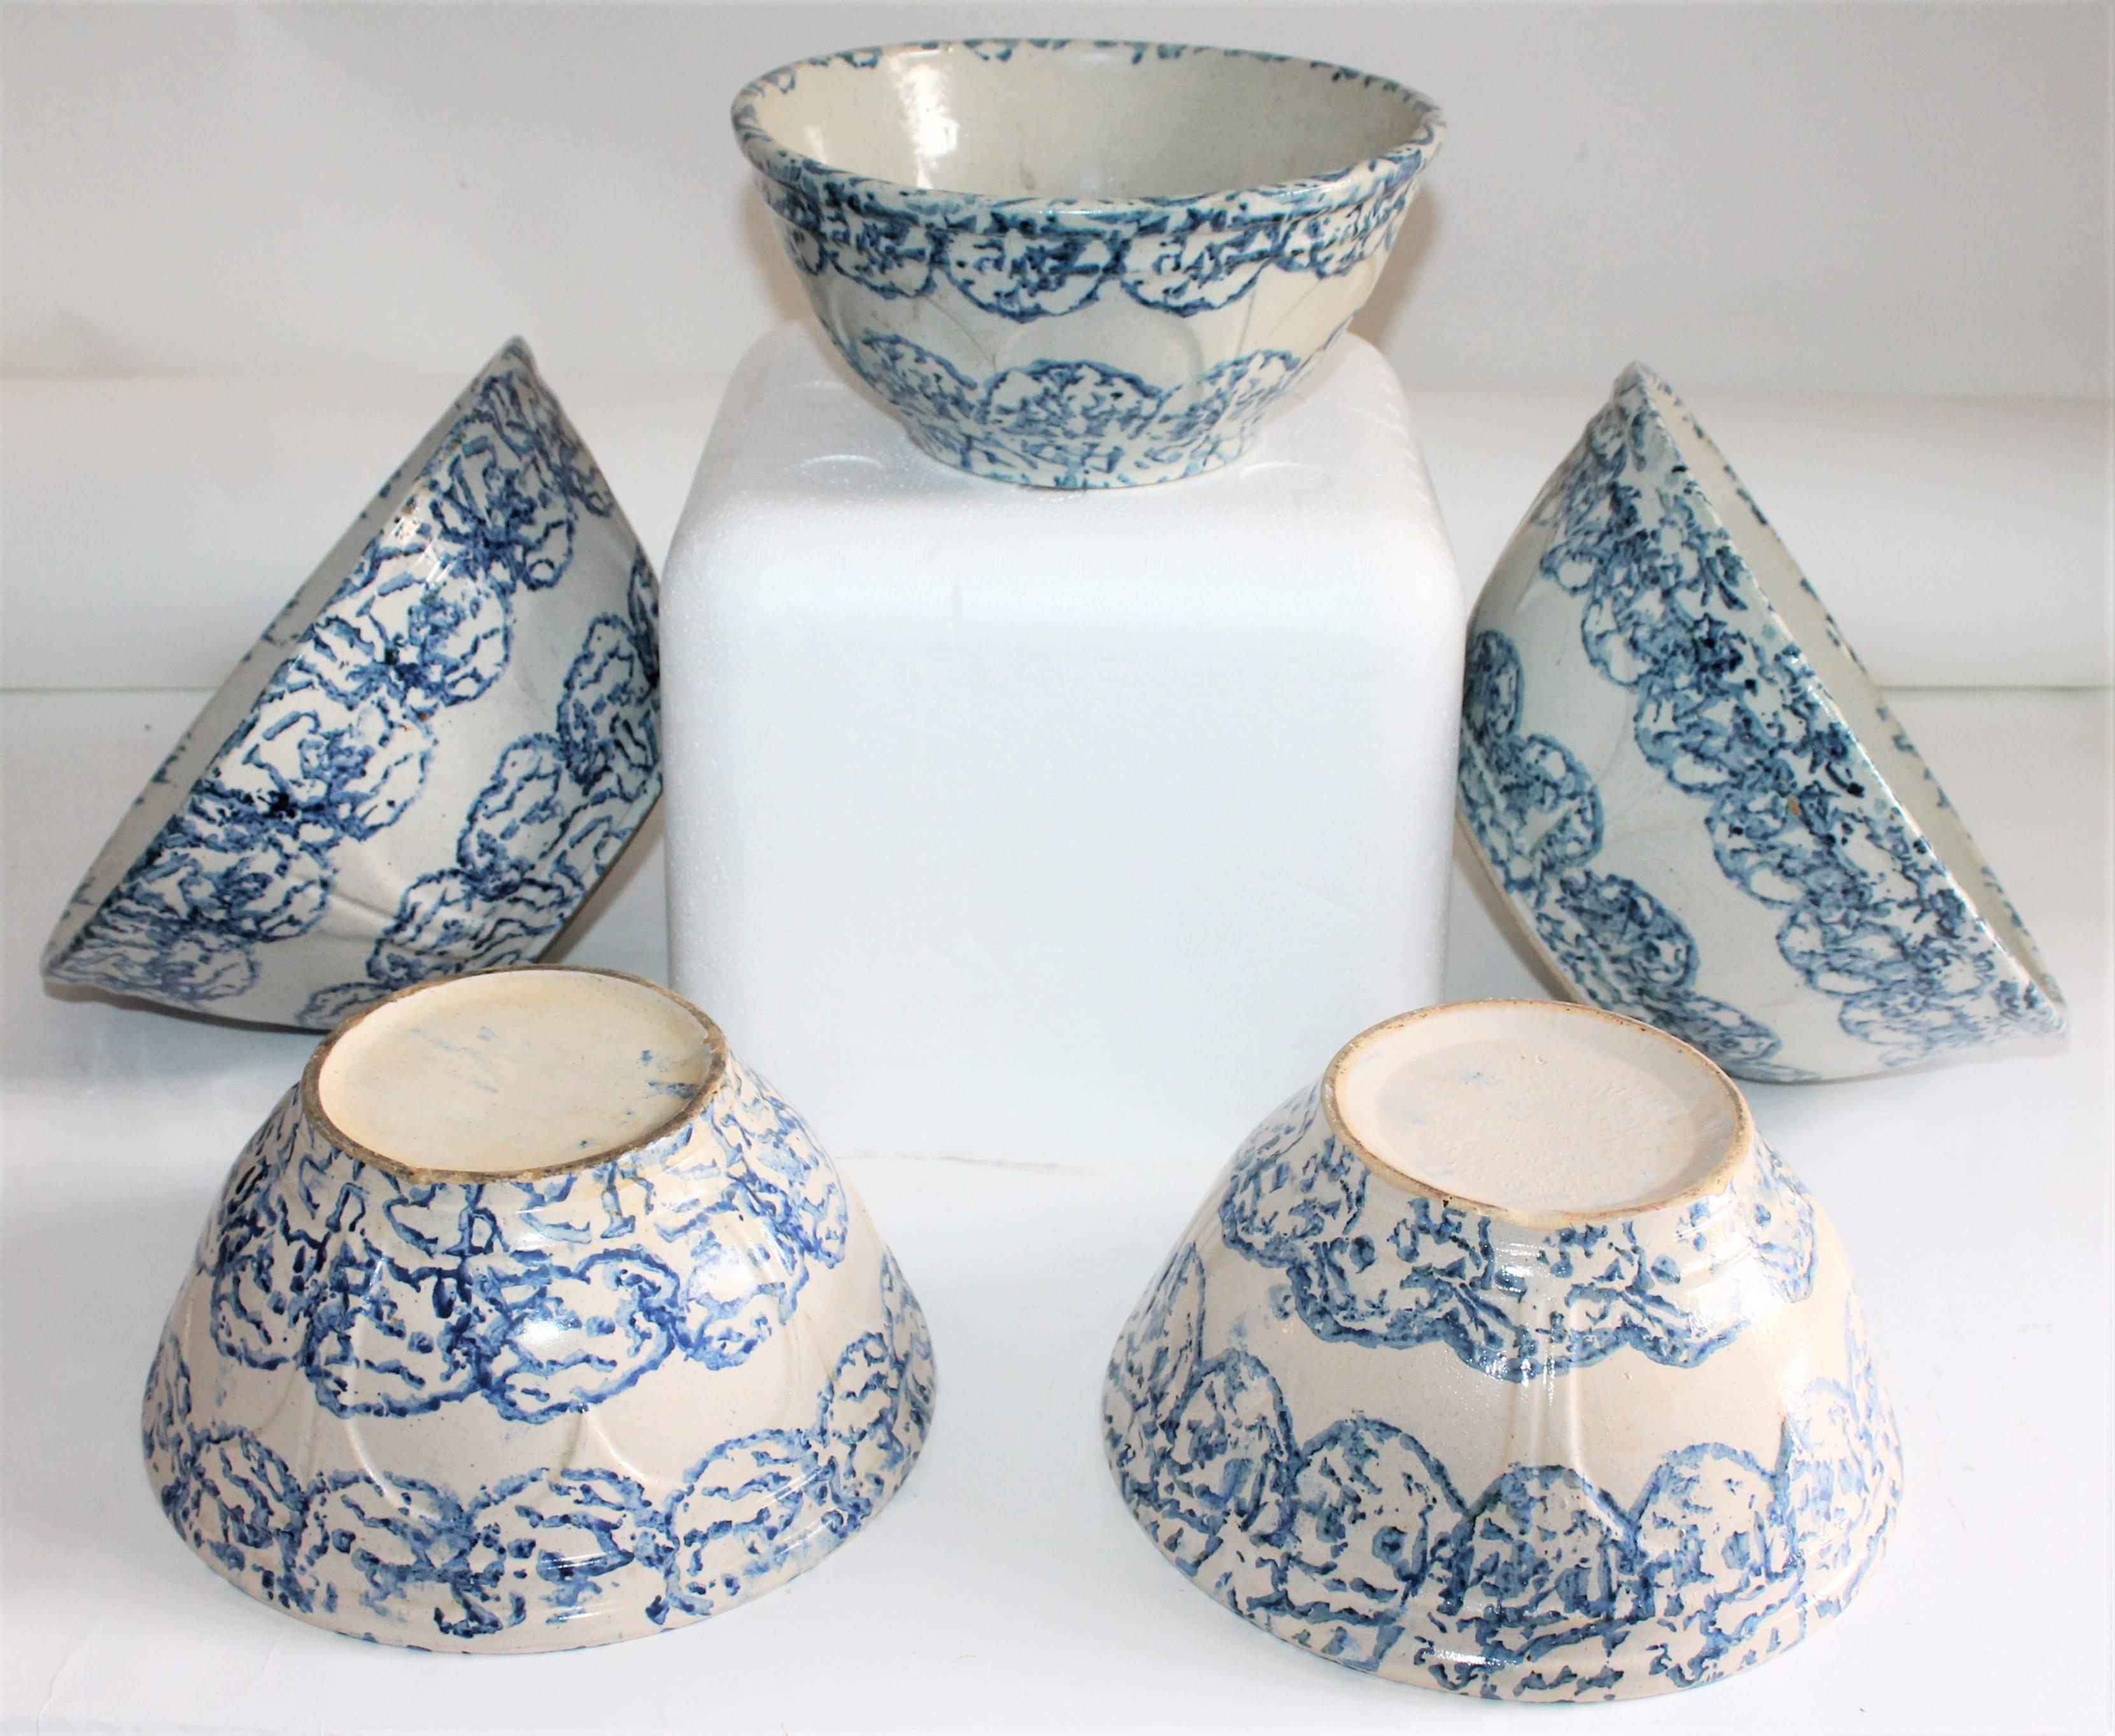 This fine group of five decorated sponge ware pottery bowls are all in good condition. Sold as a collection of five with design sponge pattern. All in mint condition.